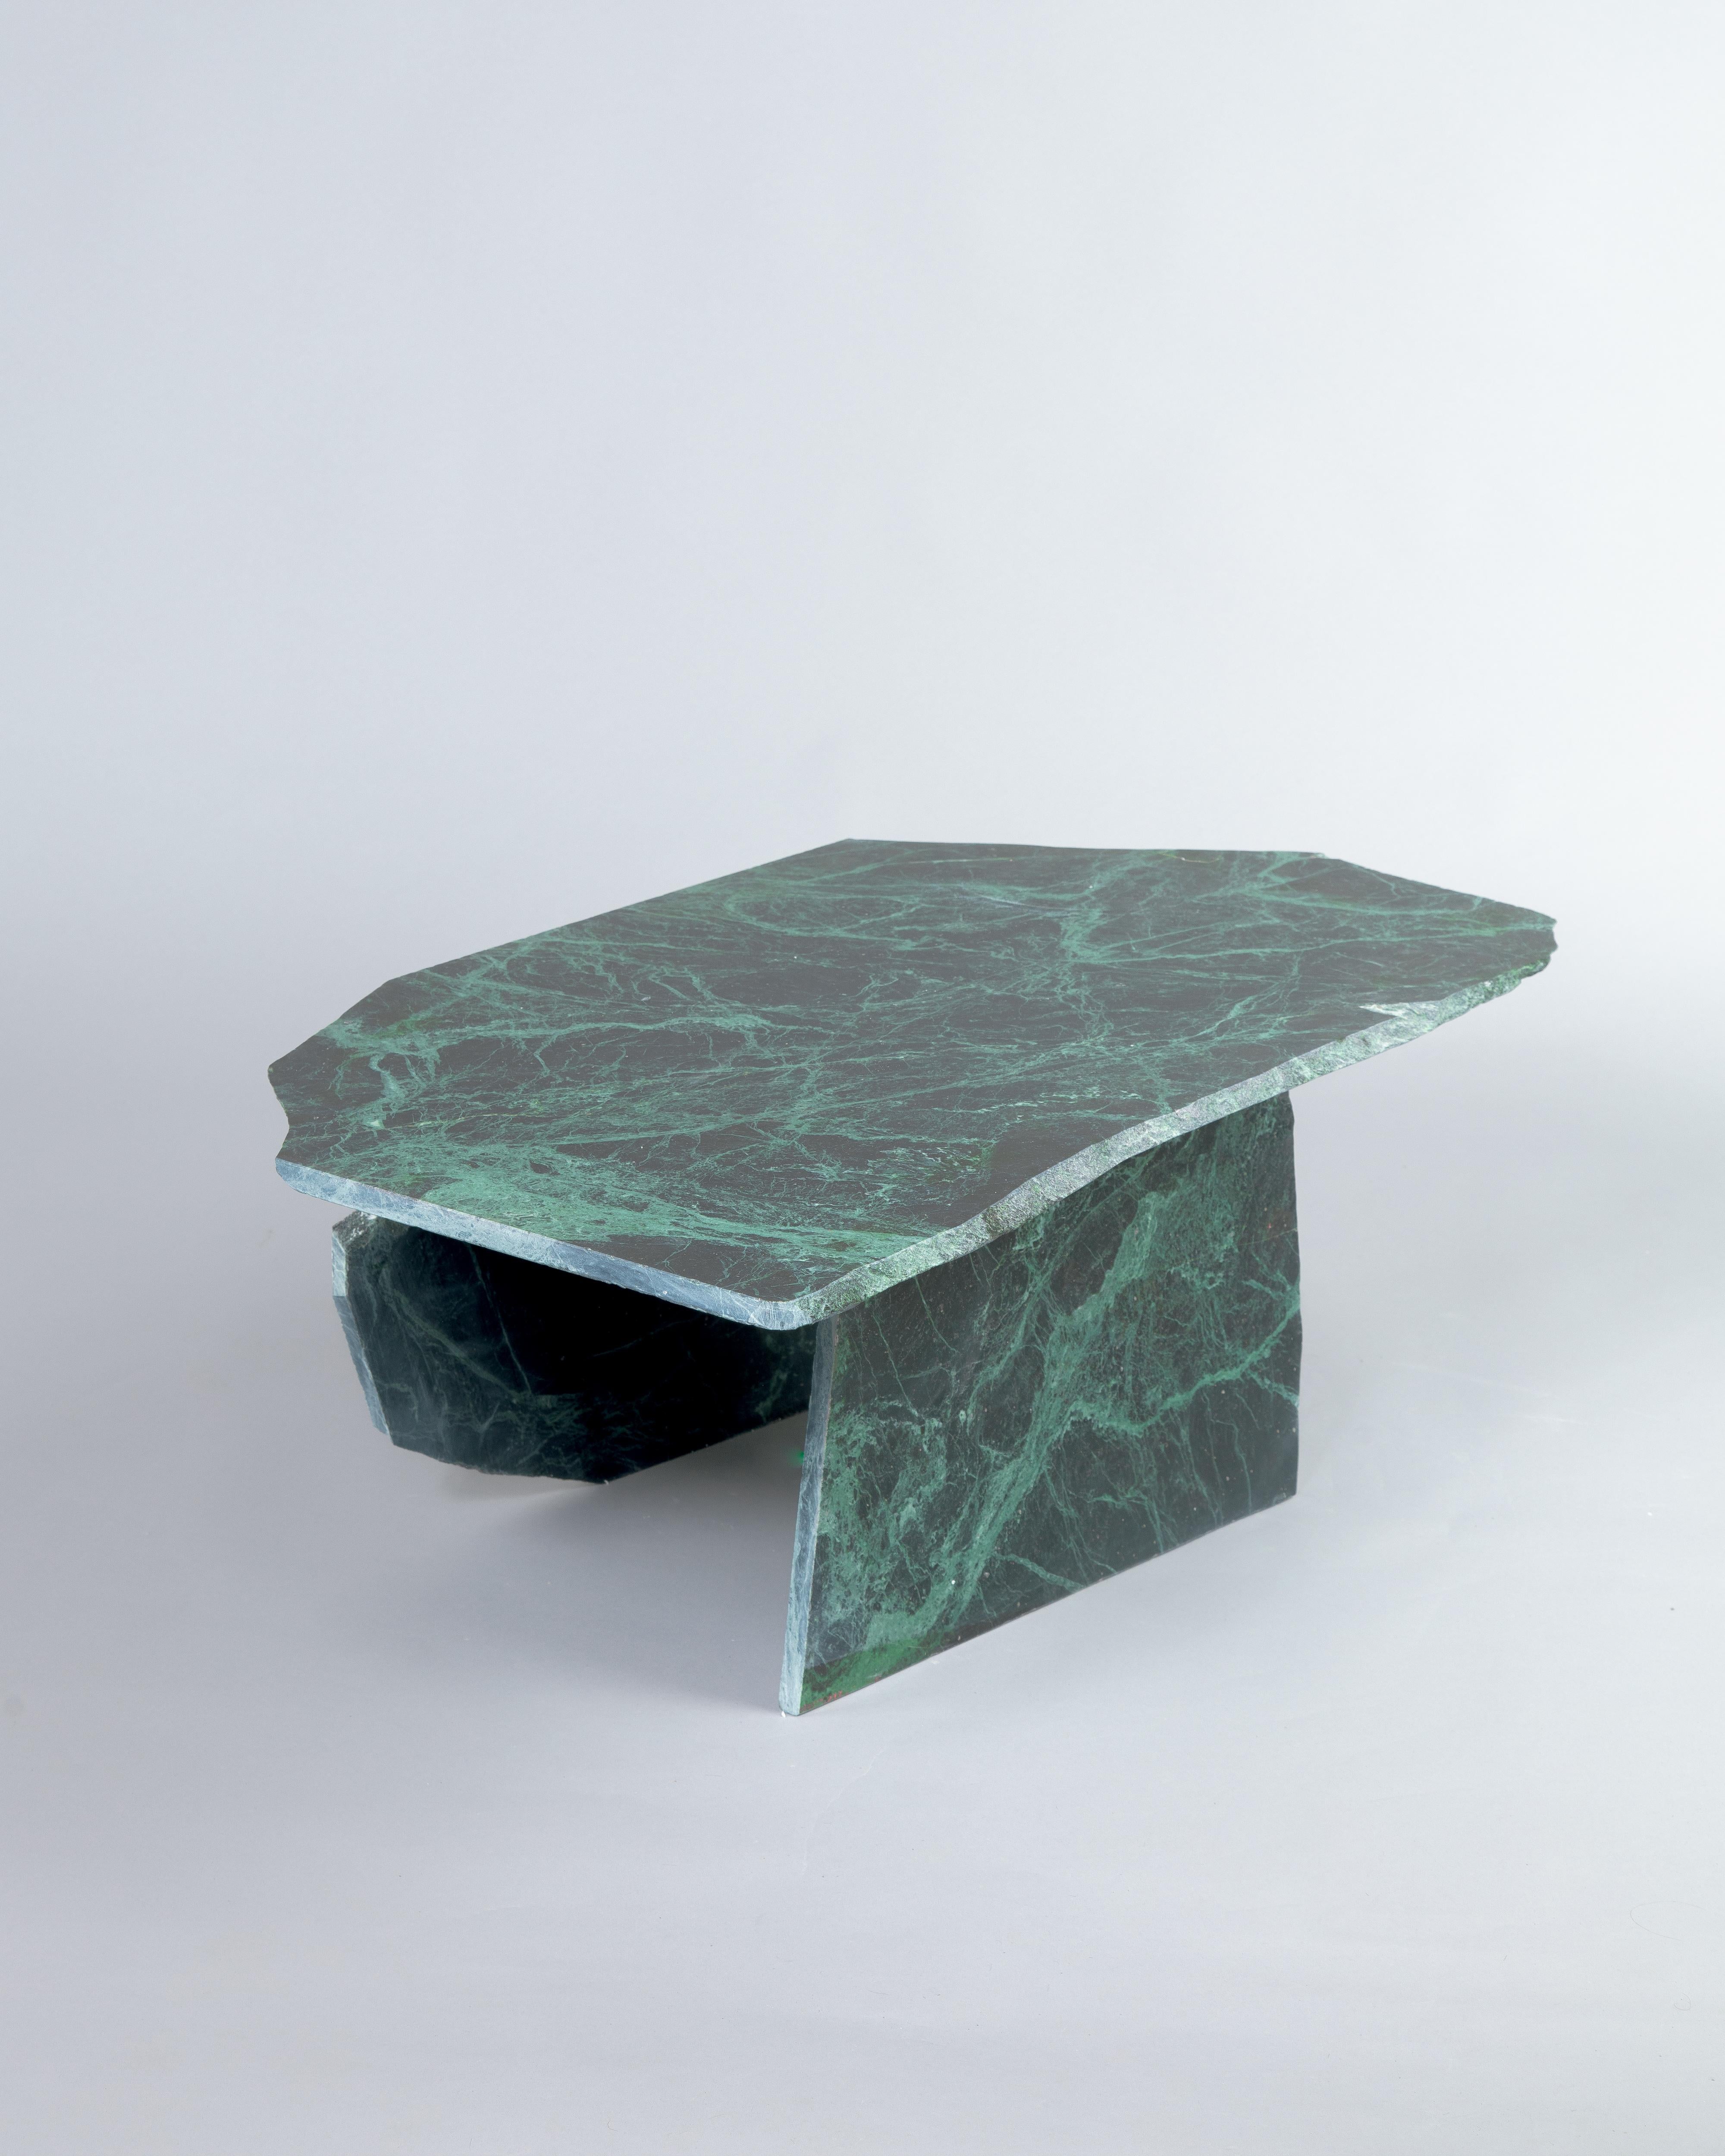 Shattered table maxi by Daniel Nikolovski
One of a kind piece
Dimensions: W 97 x D 53 x H 32 cm
Also available in W 68 x D 40 x H 27 cm.
Materials: Serpentino Marble Matt

Leftover shattered marble pieces turned into functional coffee tables.